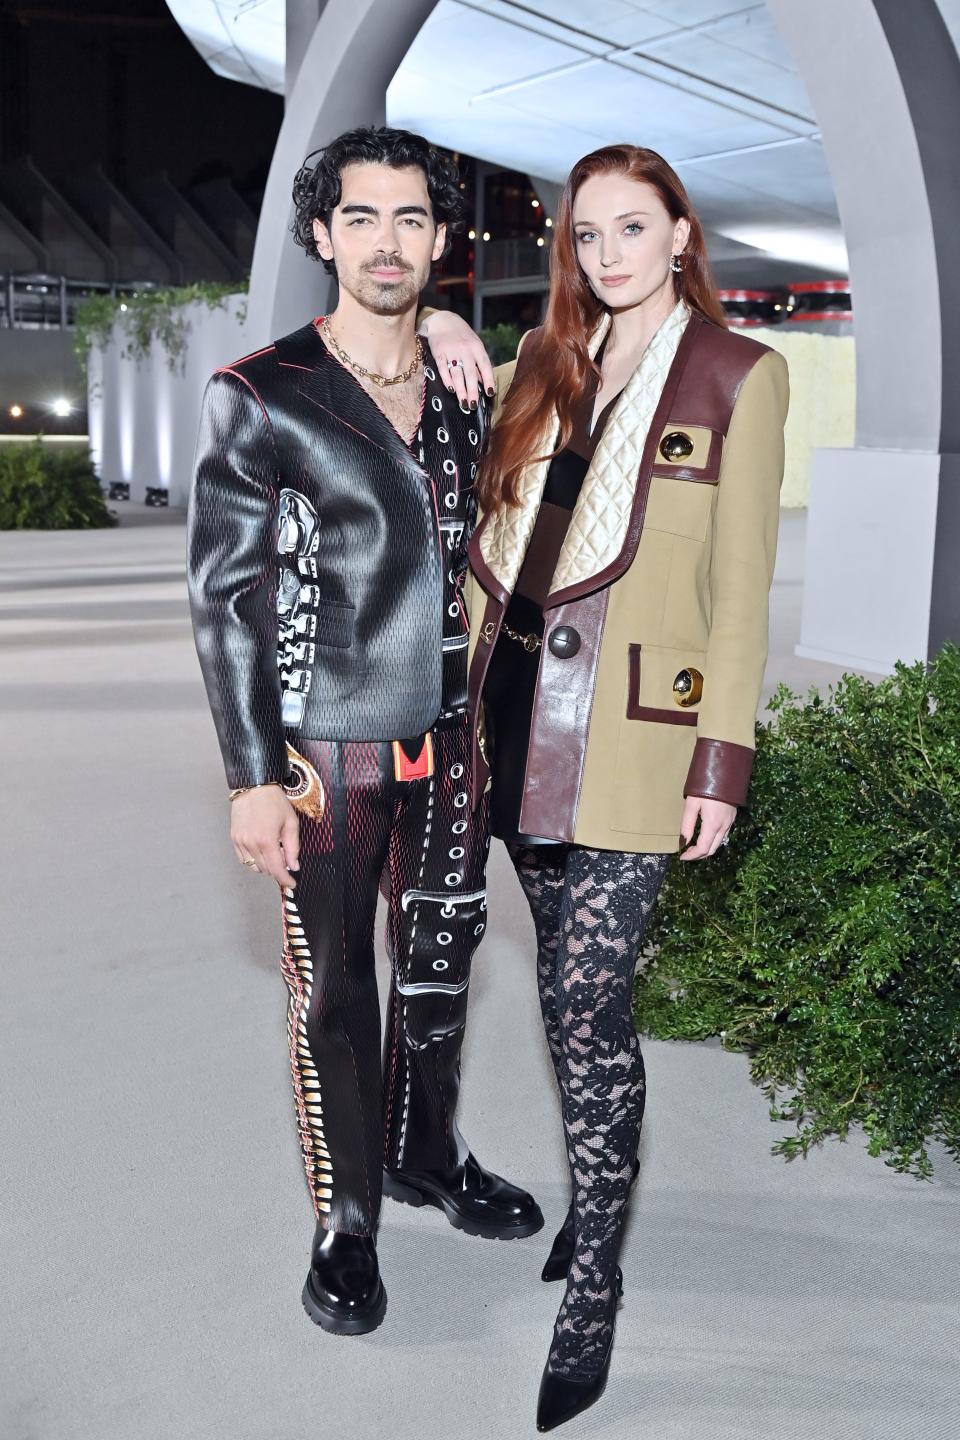 Joe Jonas and Sophie Turner attend the Academy Museum Gala in LA on October 15, 2022.